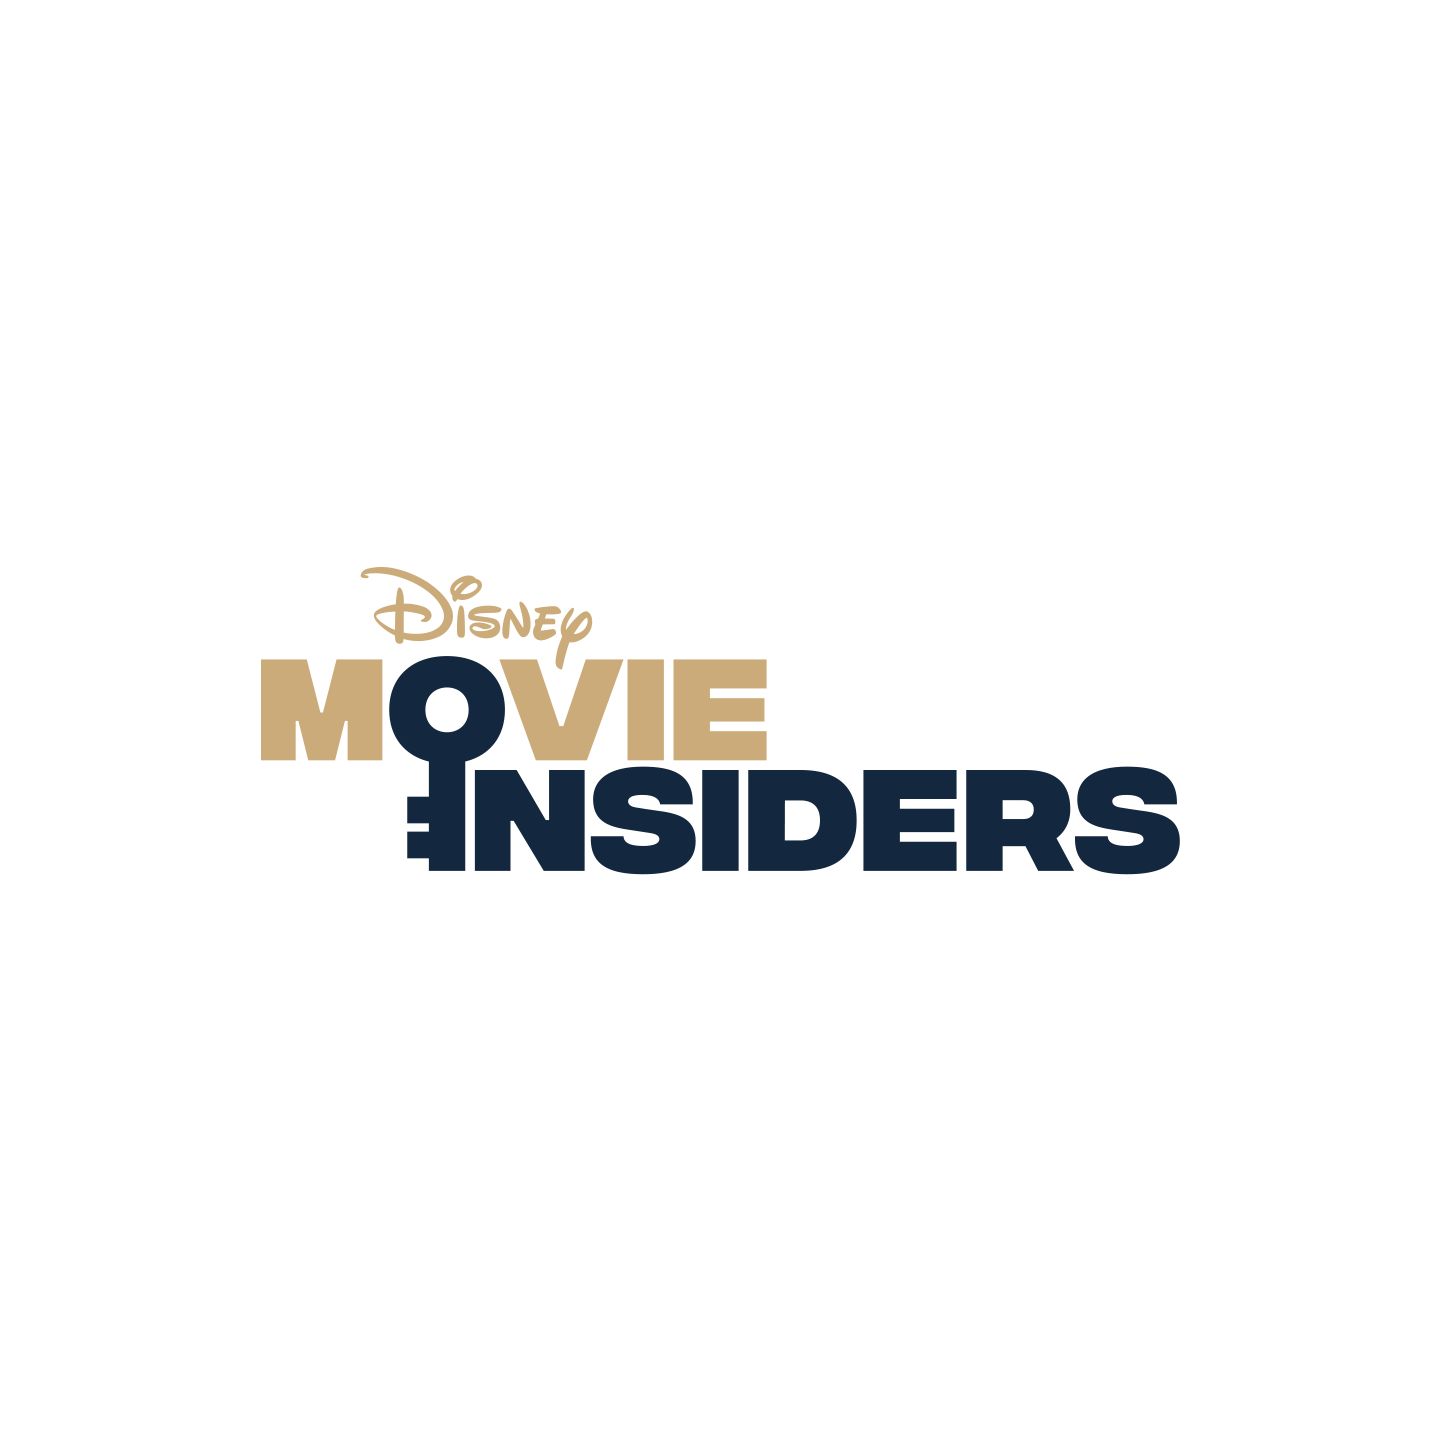 In Theaters Now! Register your ticket to earn up to 150 Disney Movie Insider Points! GET TICKETS